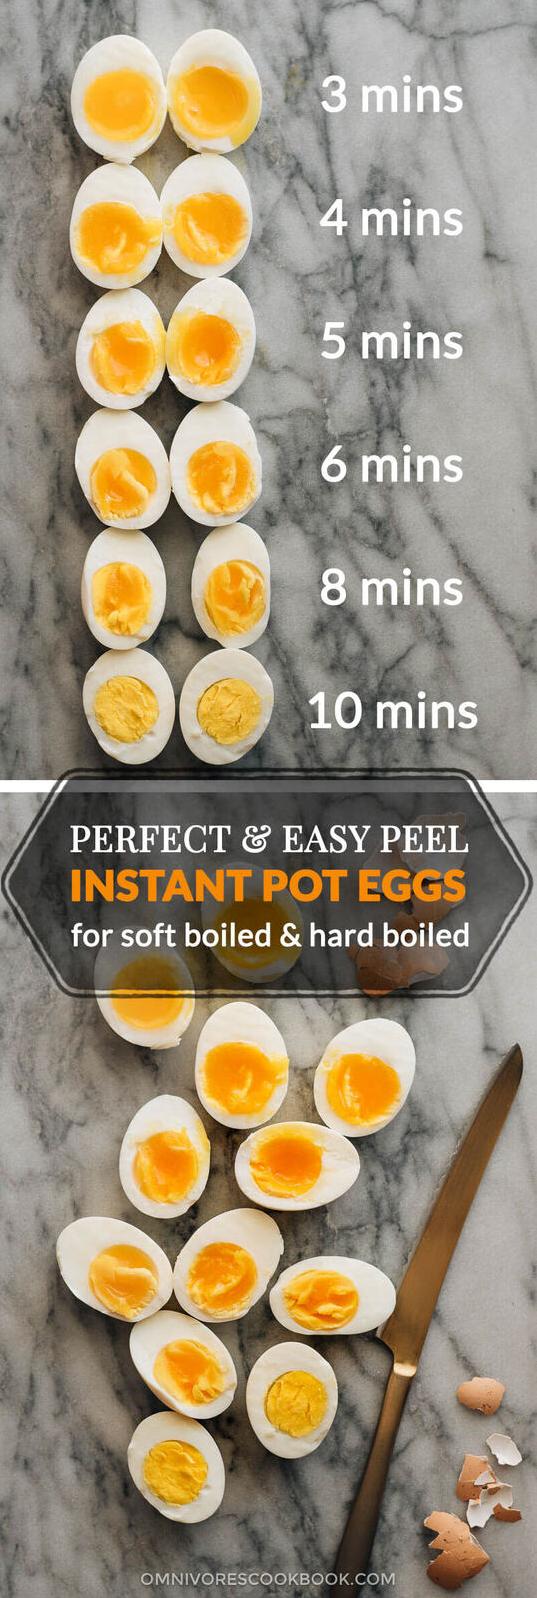  Super simple and delicious: Instant Pot Boiled Eggs